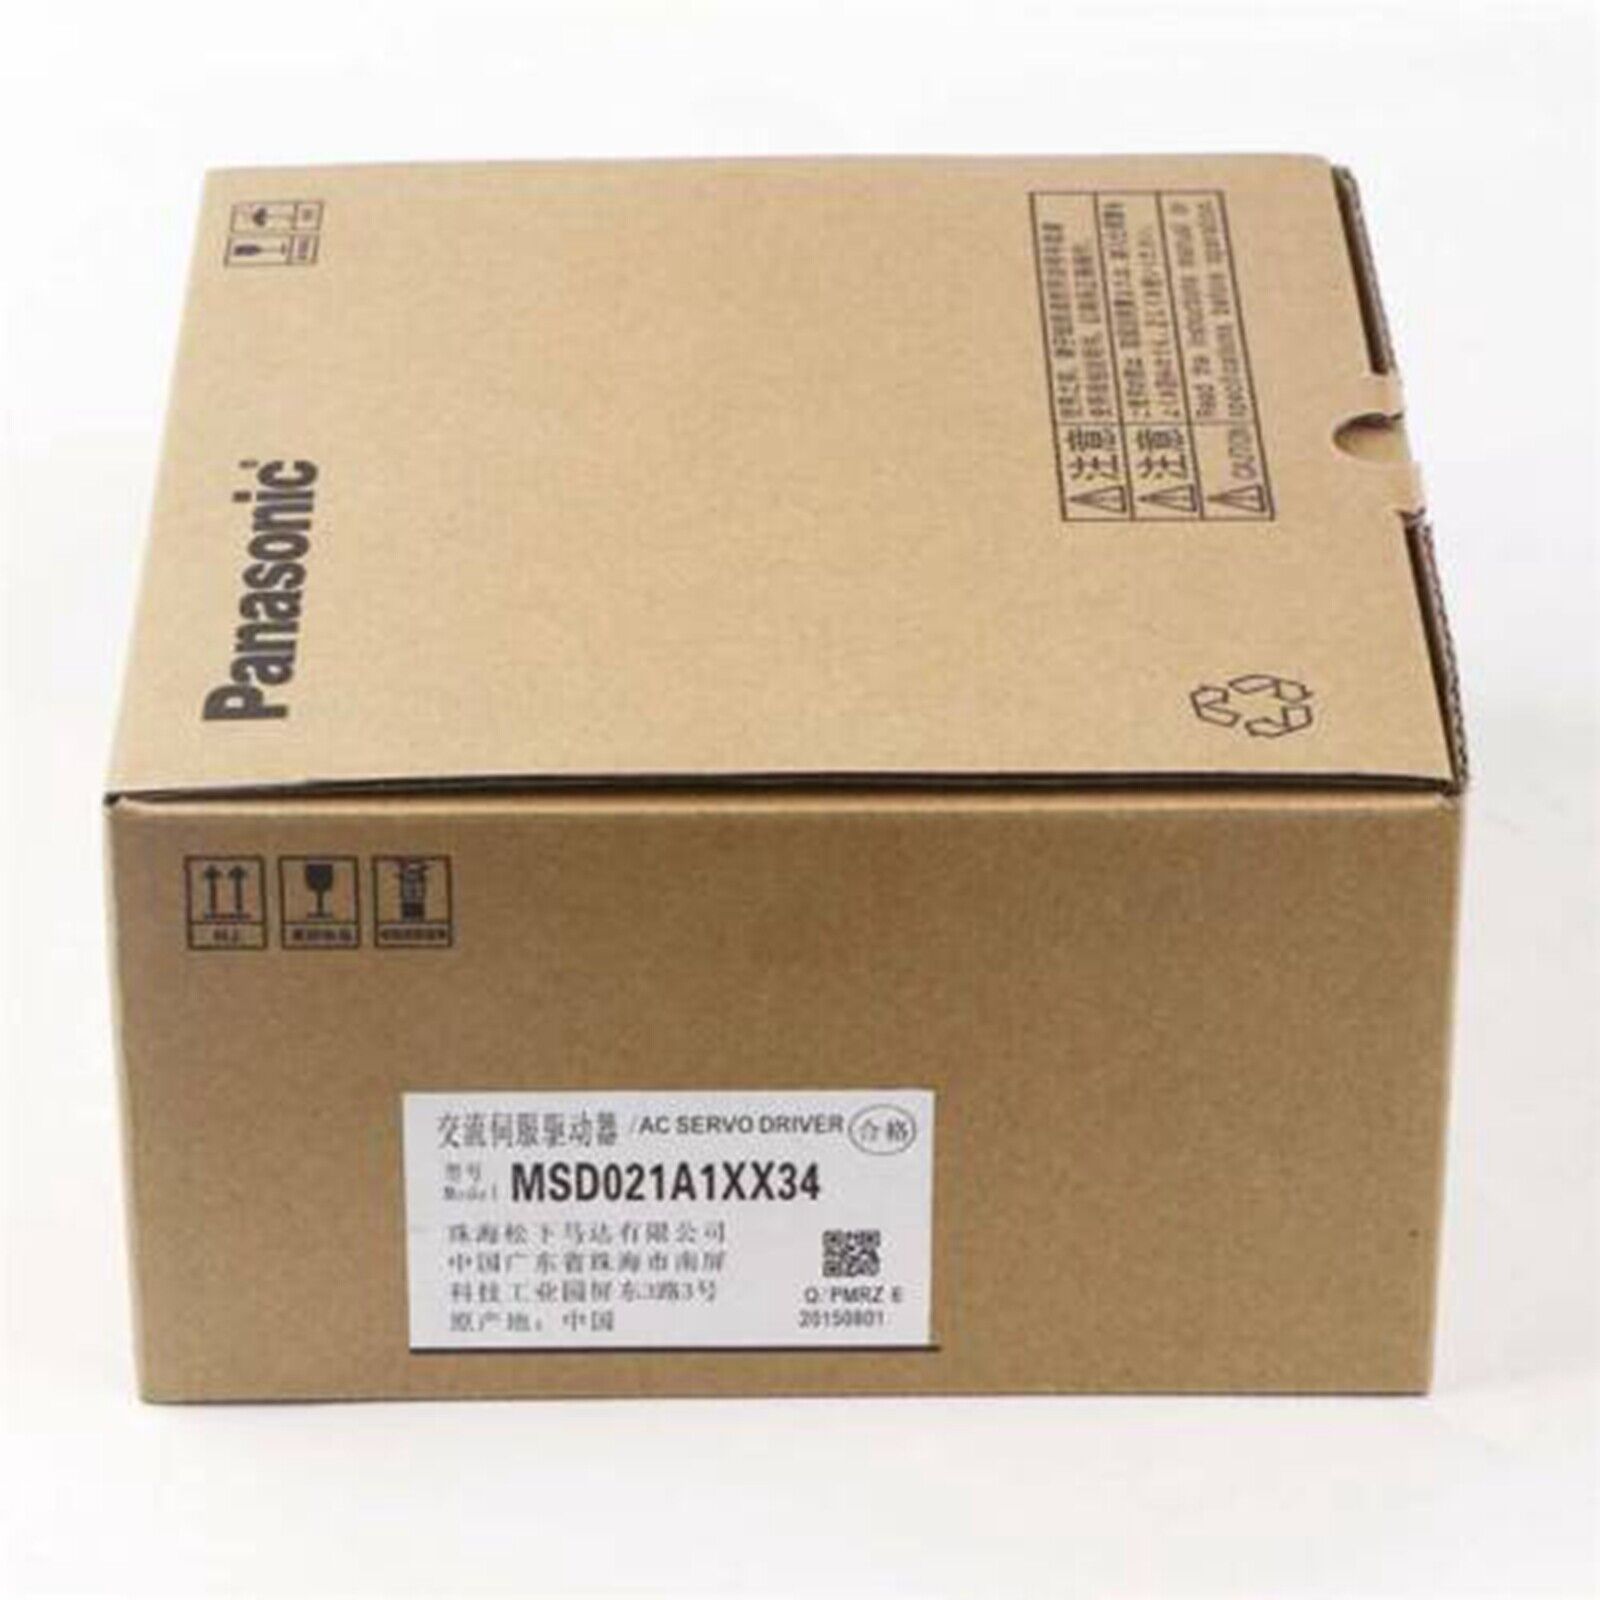 1PC Panasonic MSD021A1XX34 Servo Driver New In Box Fast Delivery